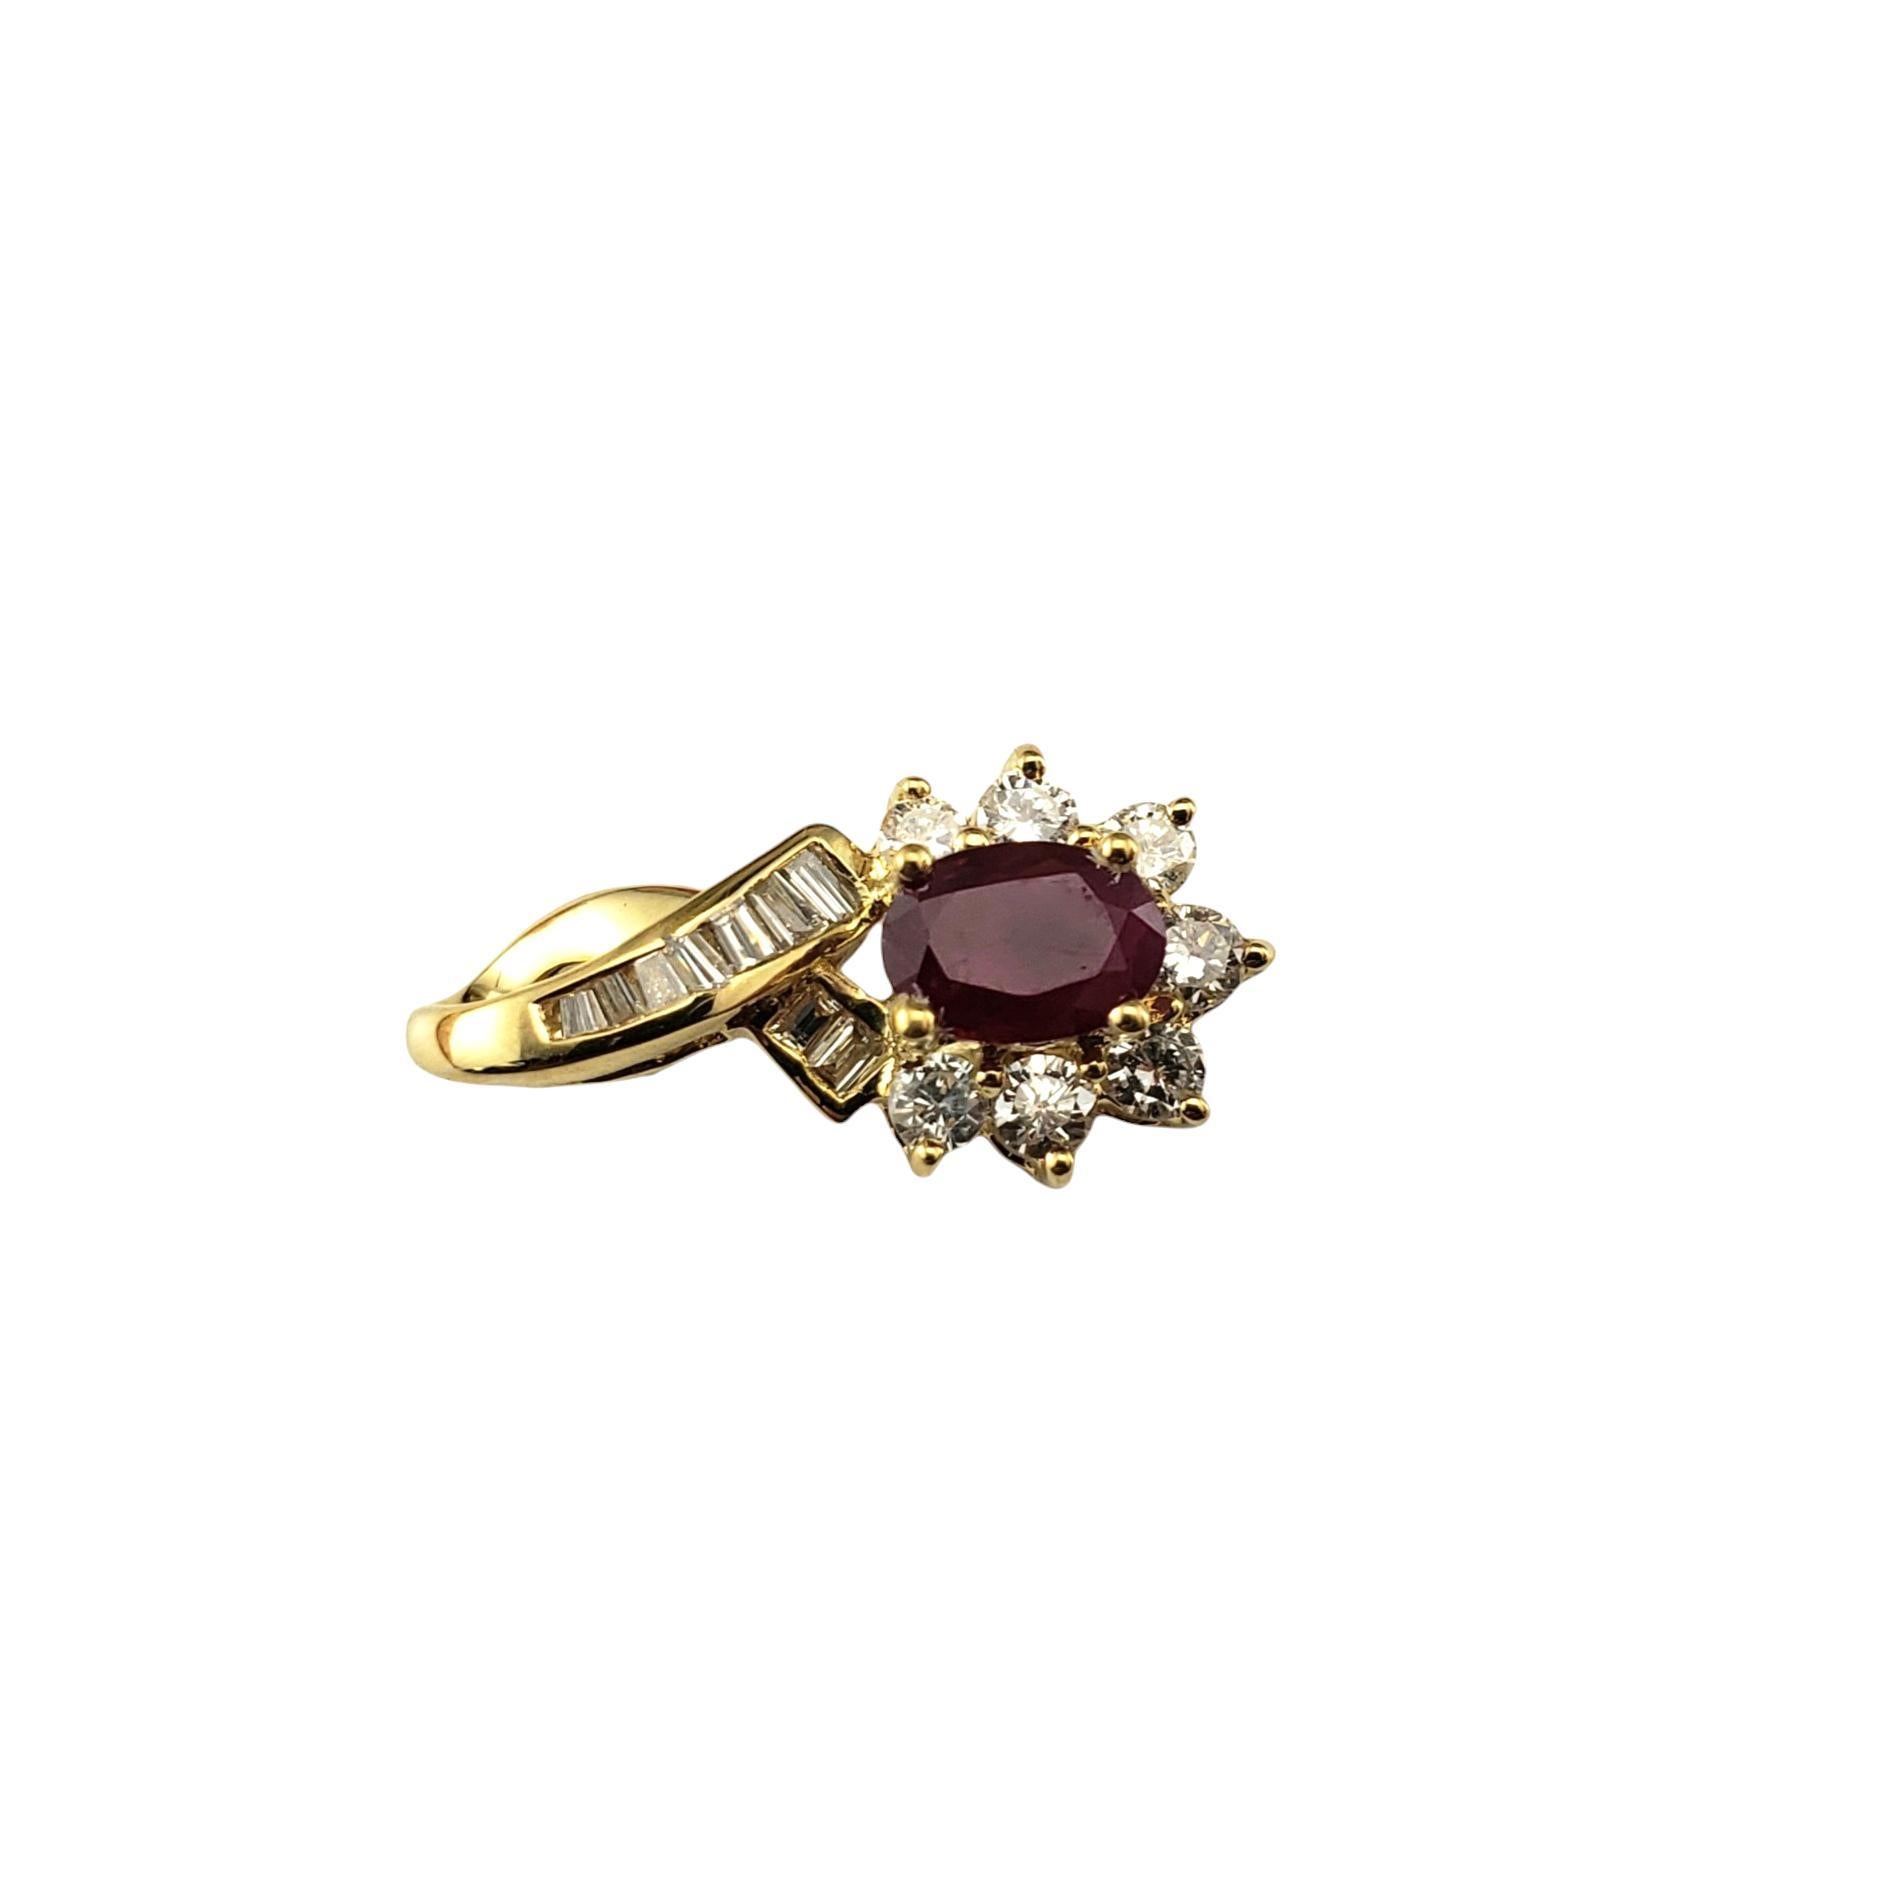 18K Yellow Gold Ruby and Diamond Pendant JAGi Certified-

This stunning pendant features one oval cut natural ruby (5.7 mm x 4.0 mm), seven round brilliant cut diamonds and nine baguette cut diamonds set in classic 18K yellow gold.

Ruby weight: 